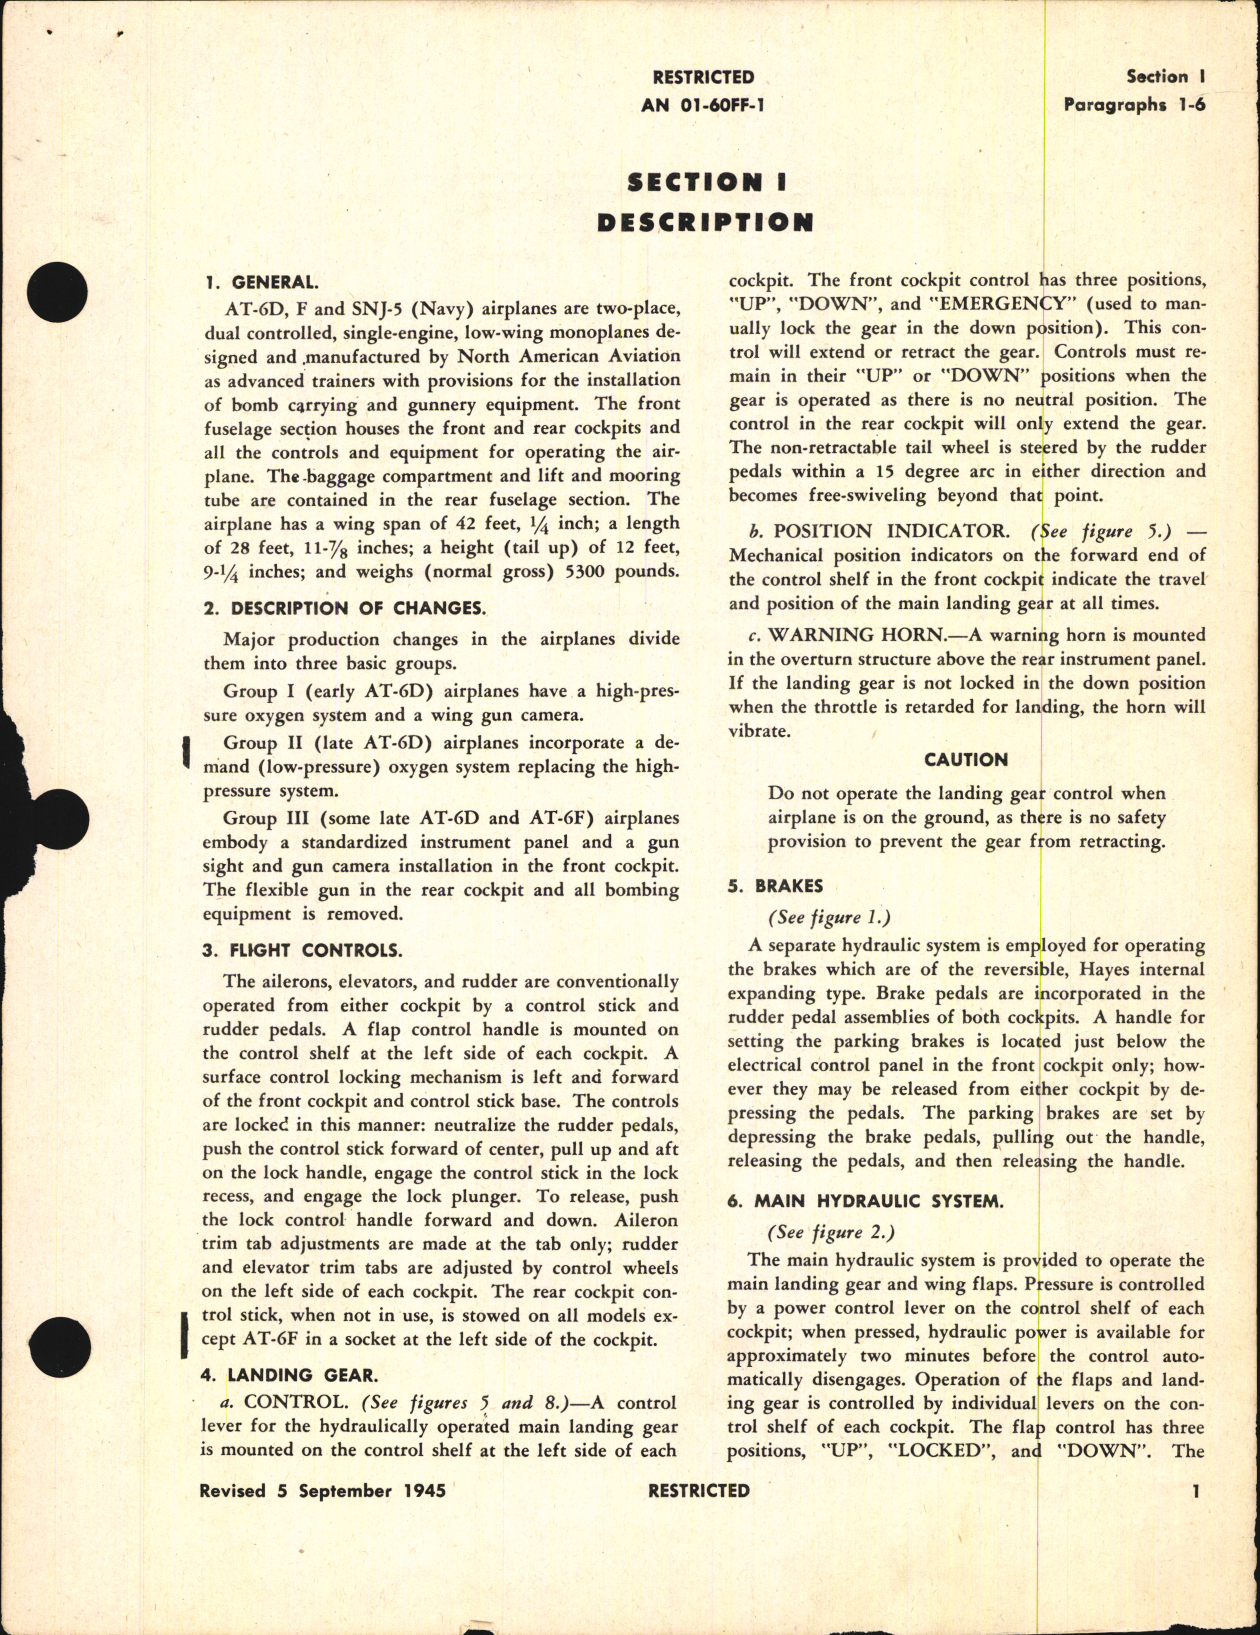 Sample page 7 from AirCorps Library document: Pilot's Handbook for AT-6D, AT-6F, SNJ-5, SNJ-6, and Harvard III